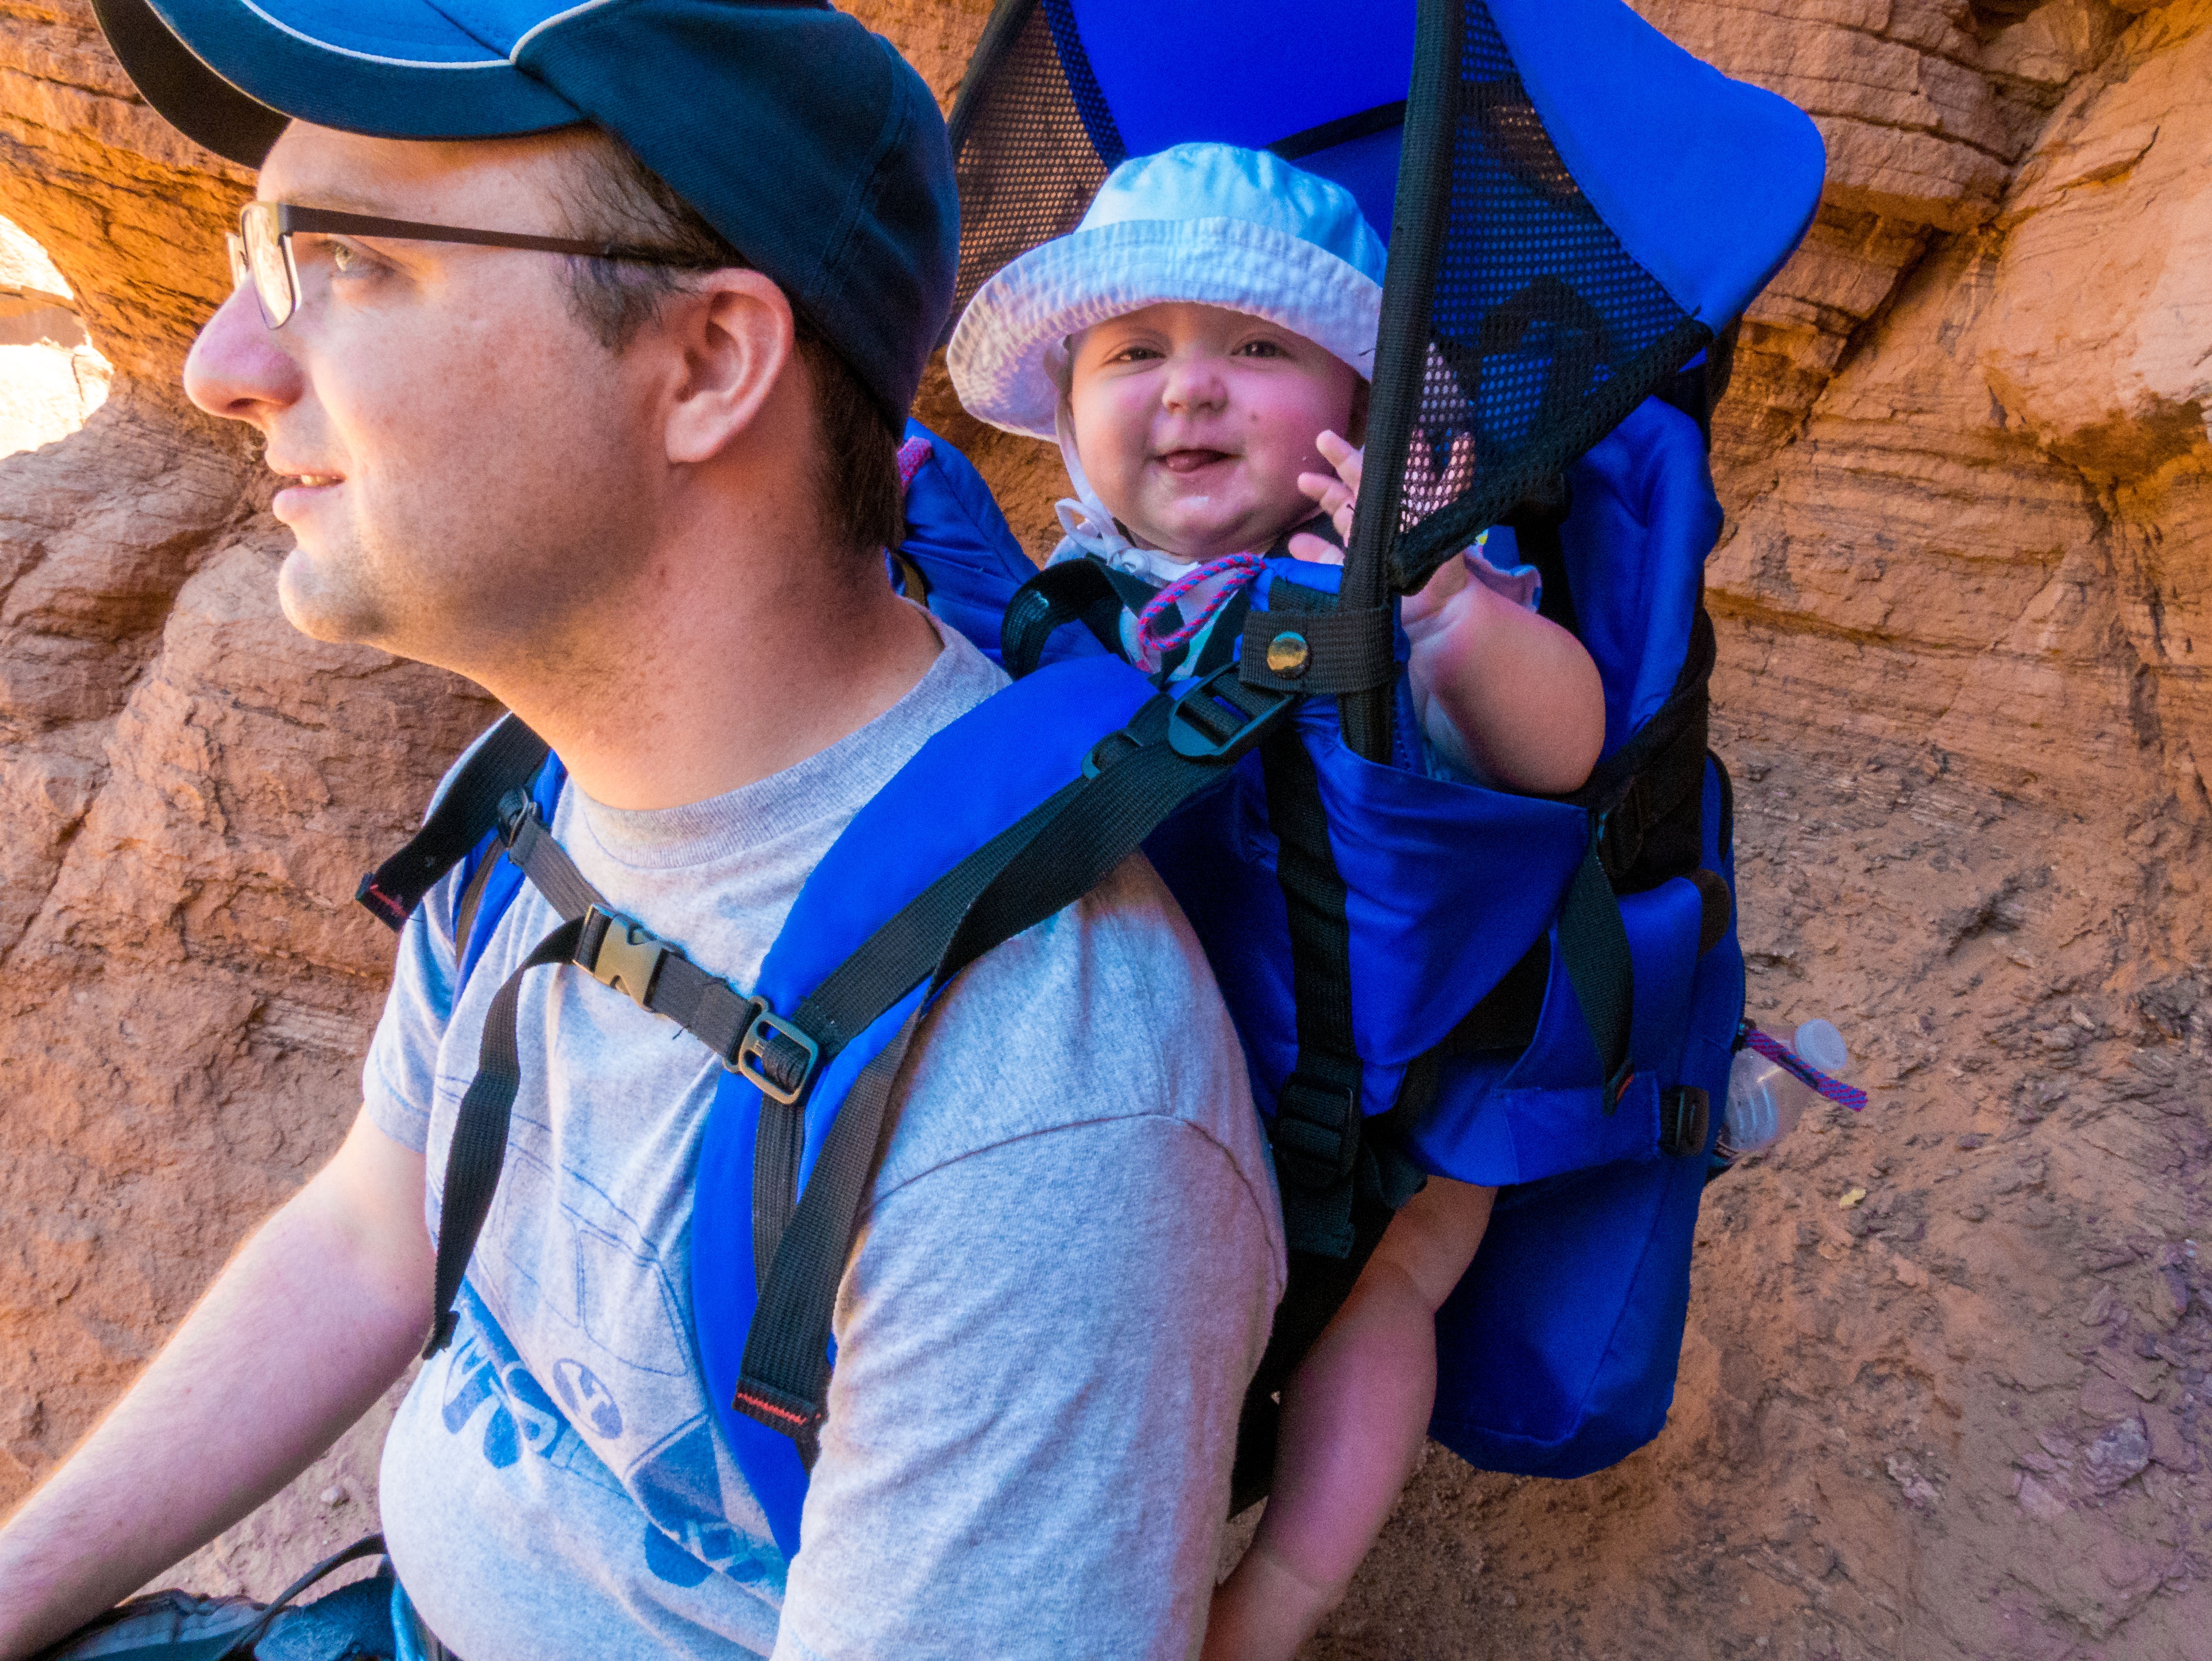 Baby in a carrier at Zion National Park